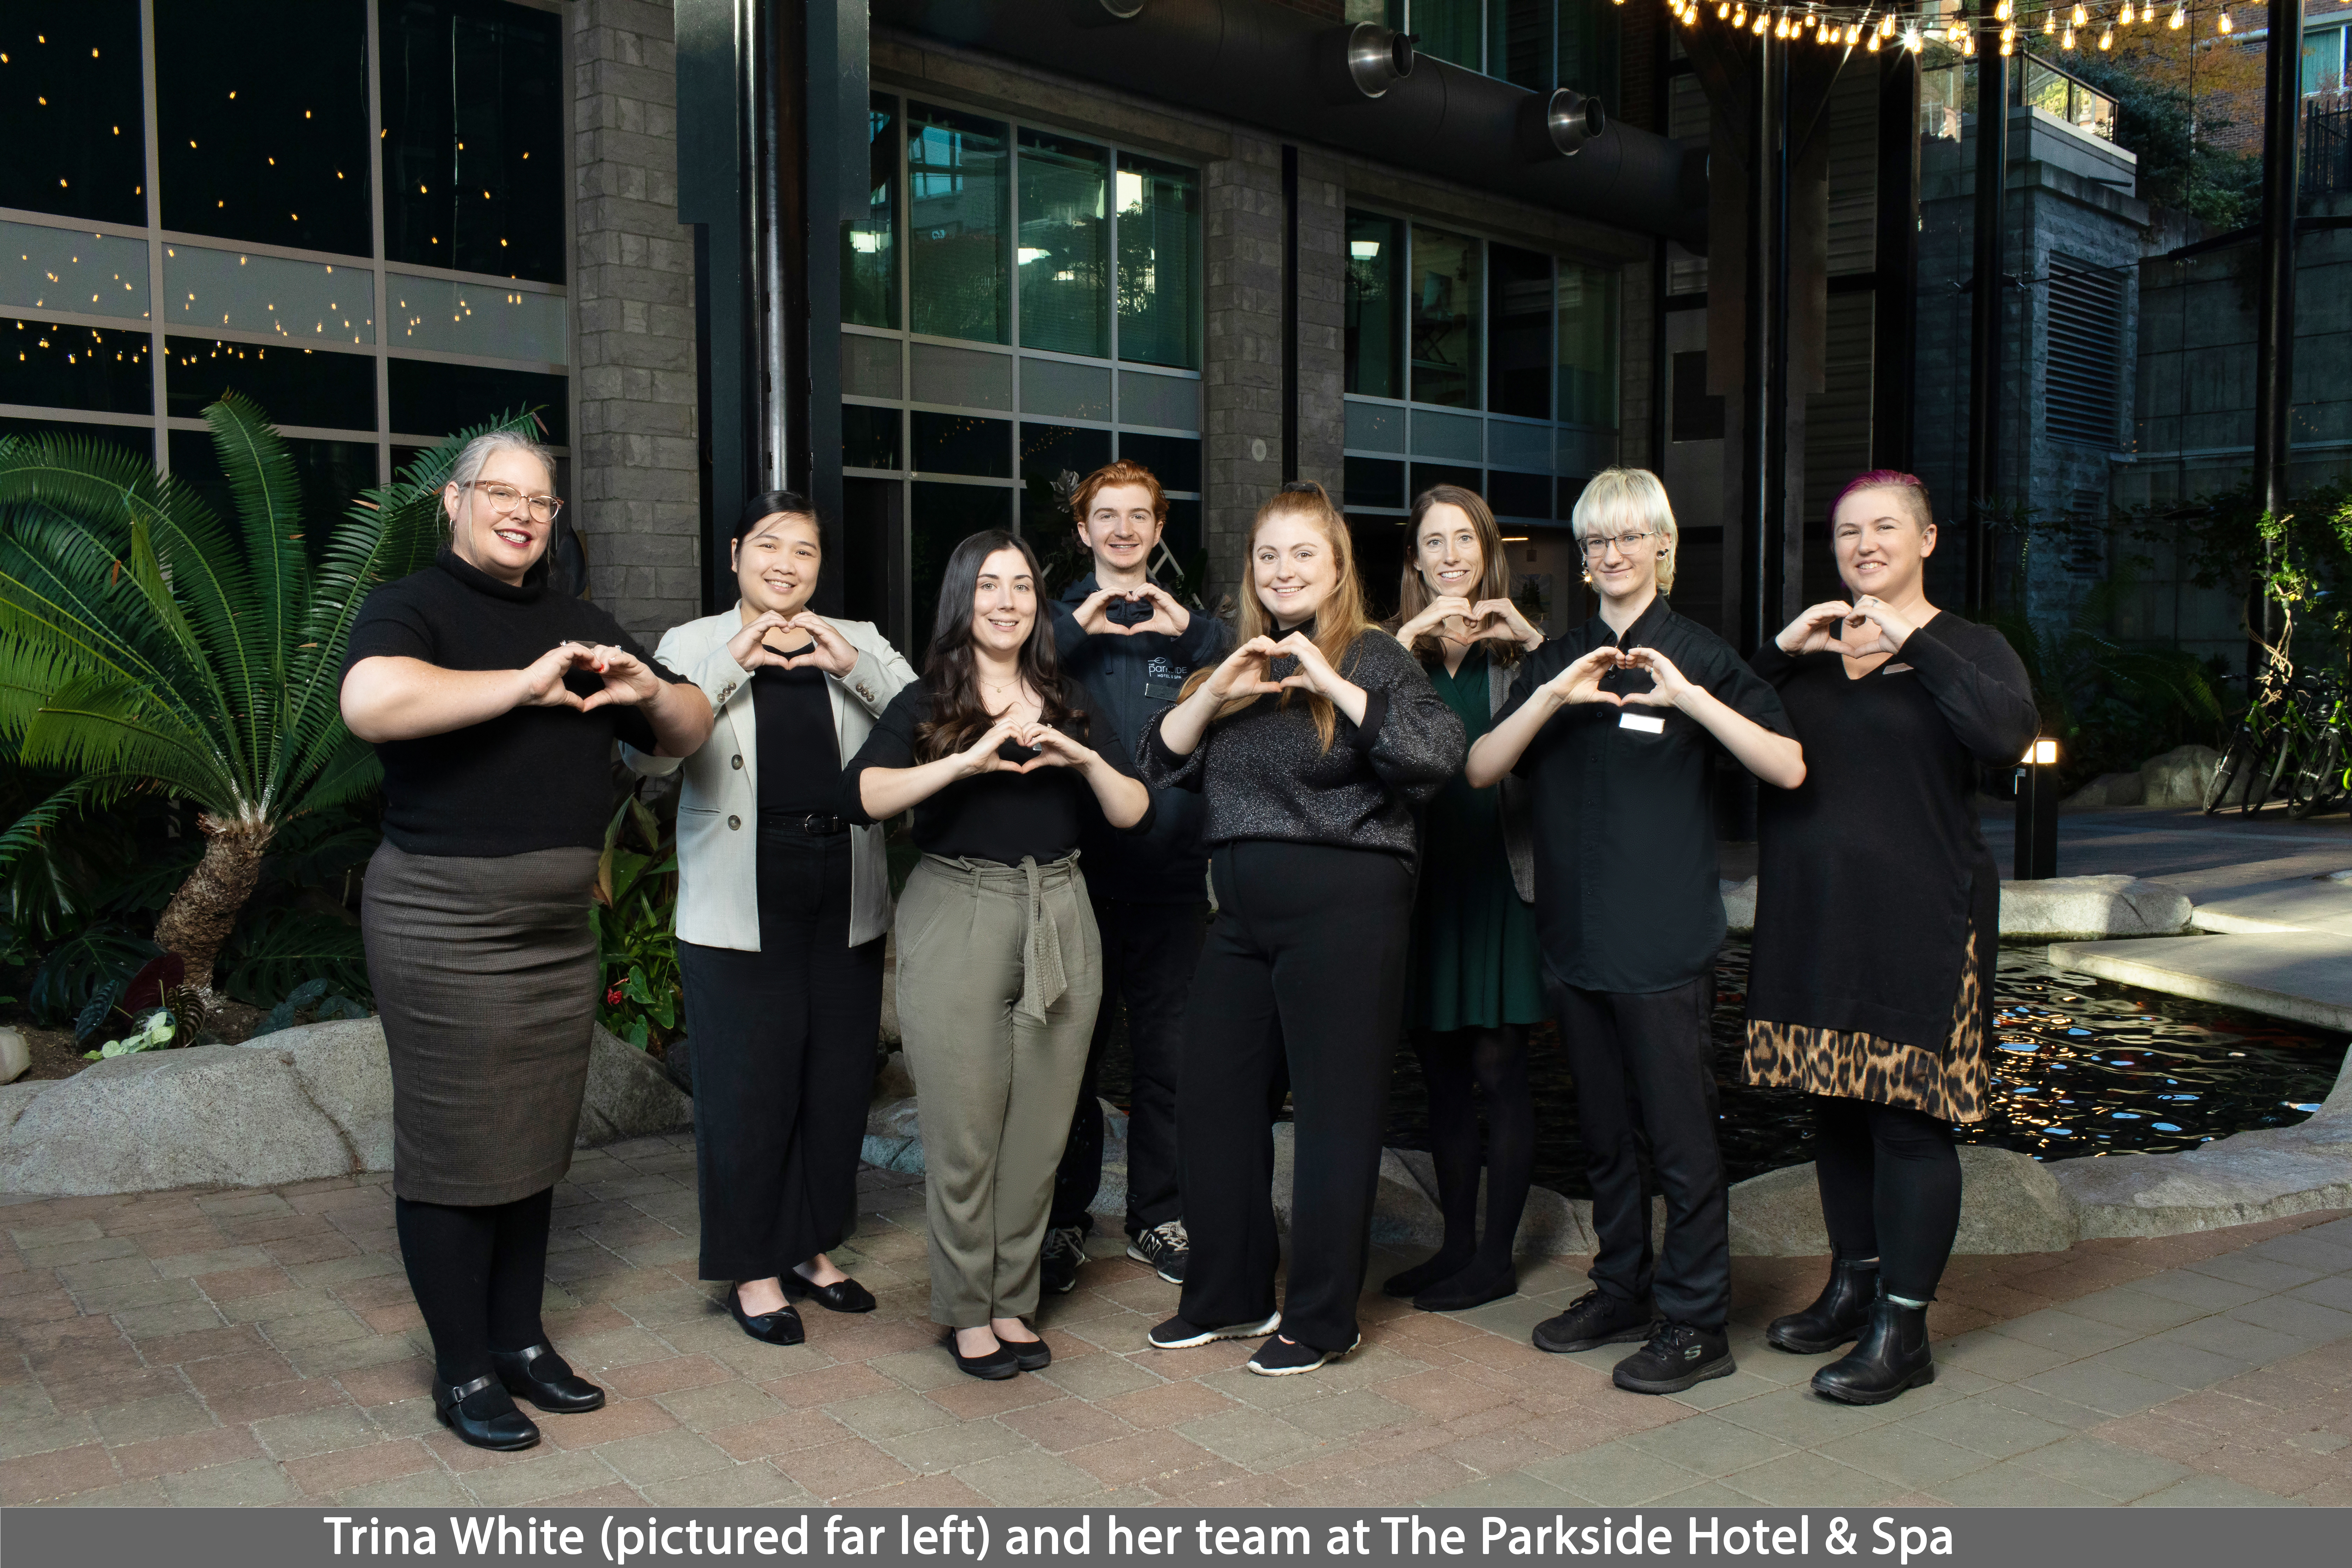 Trina White (pictured far left) and her team at The Parkside Hotel & Spa